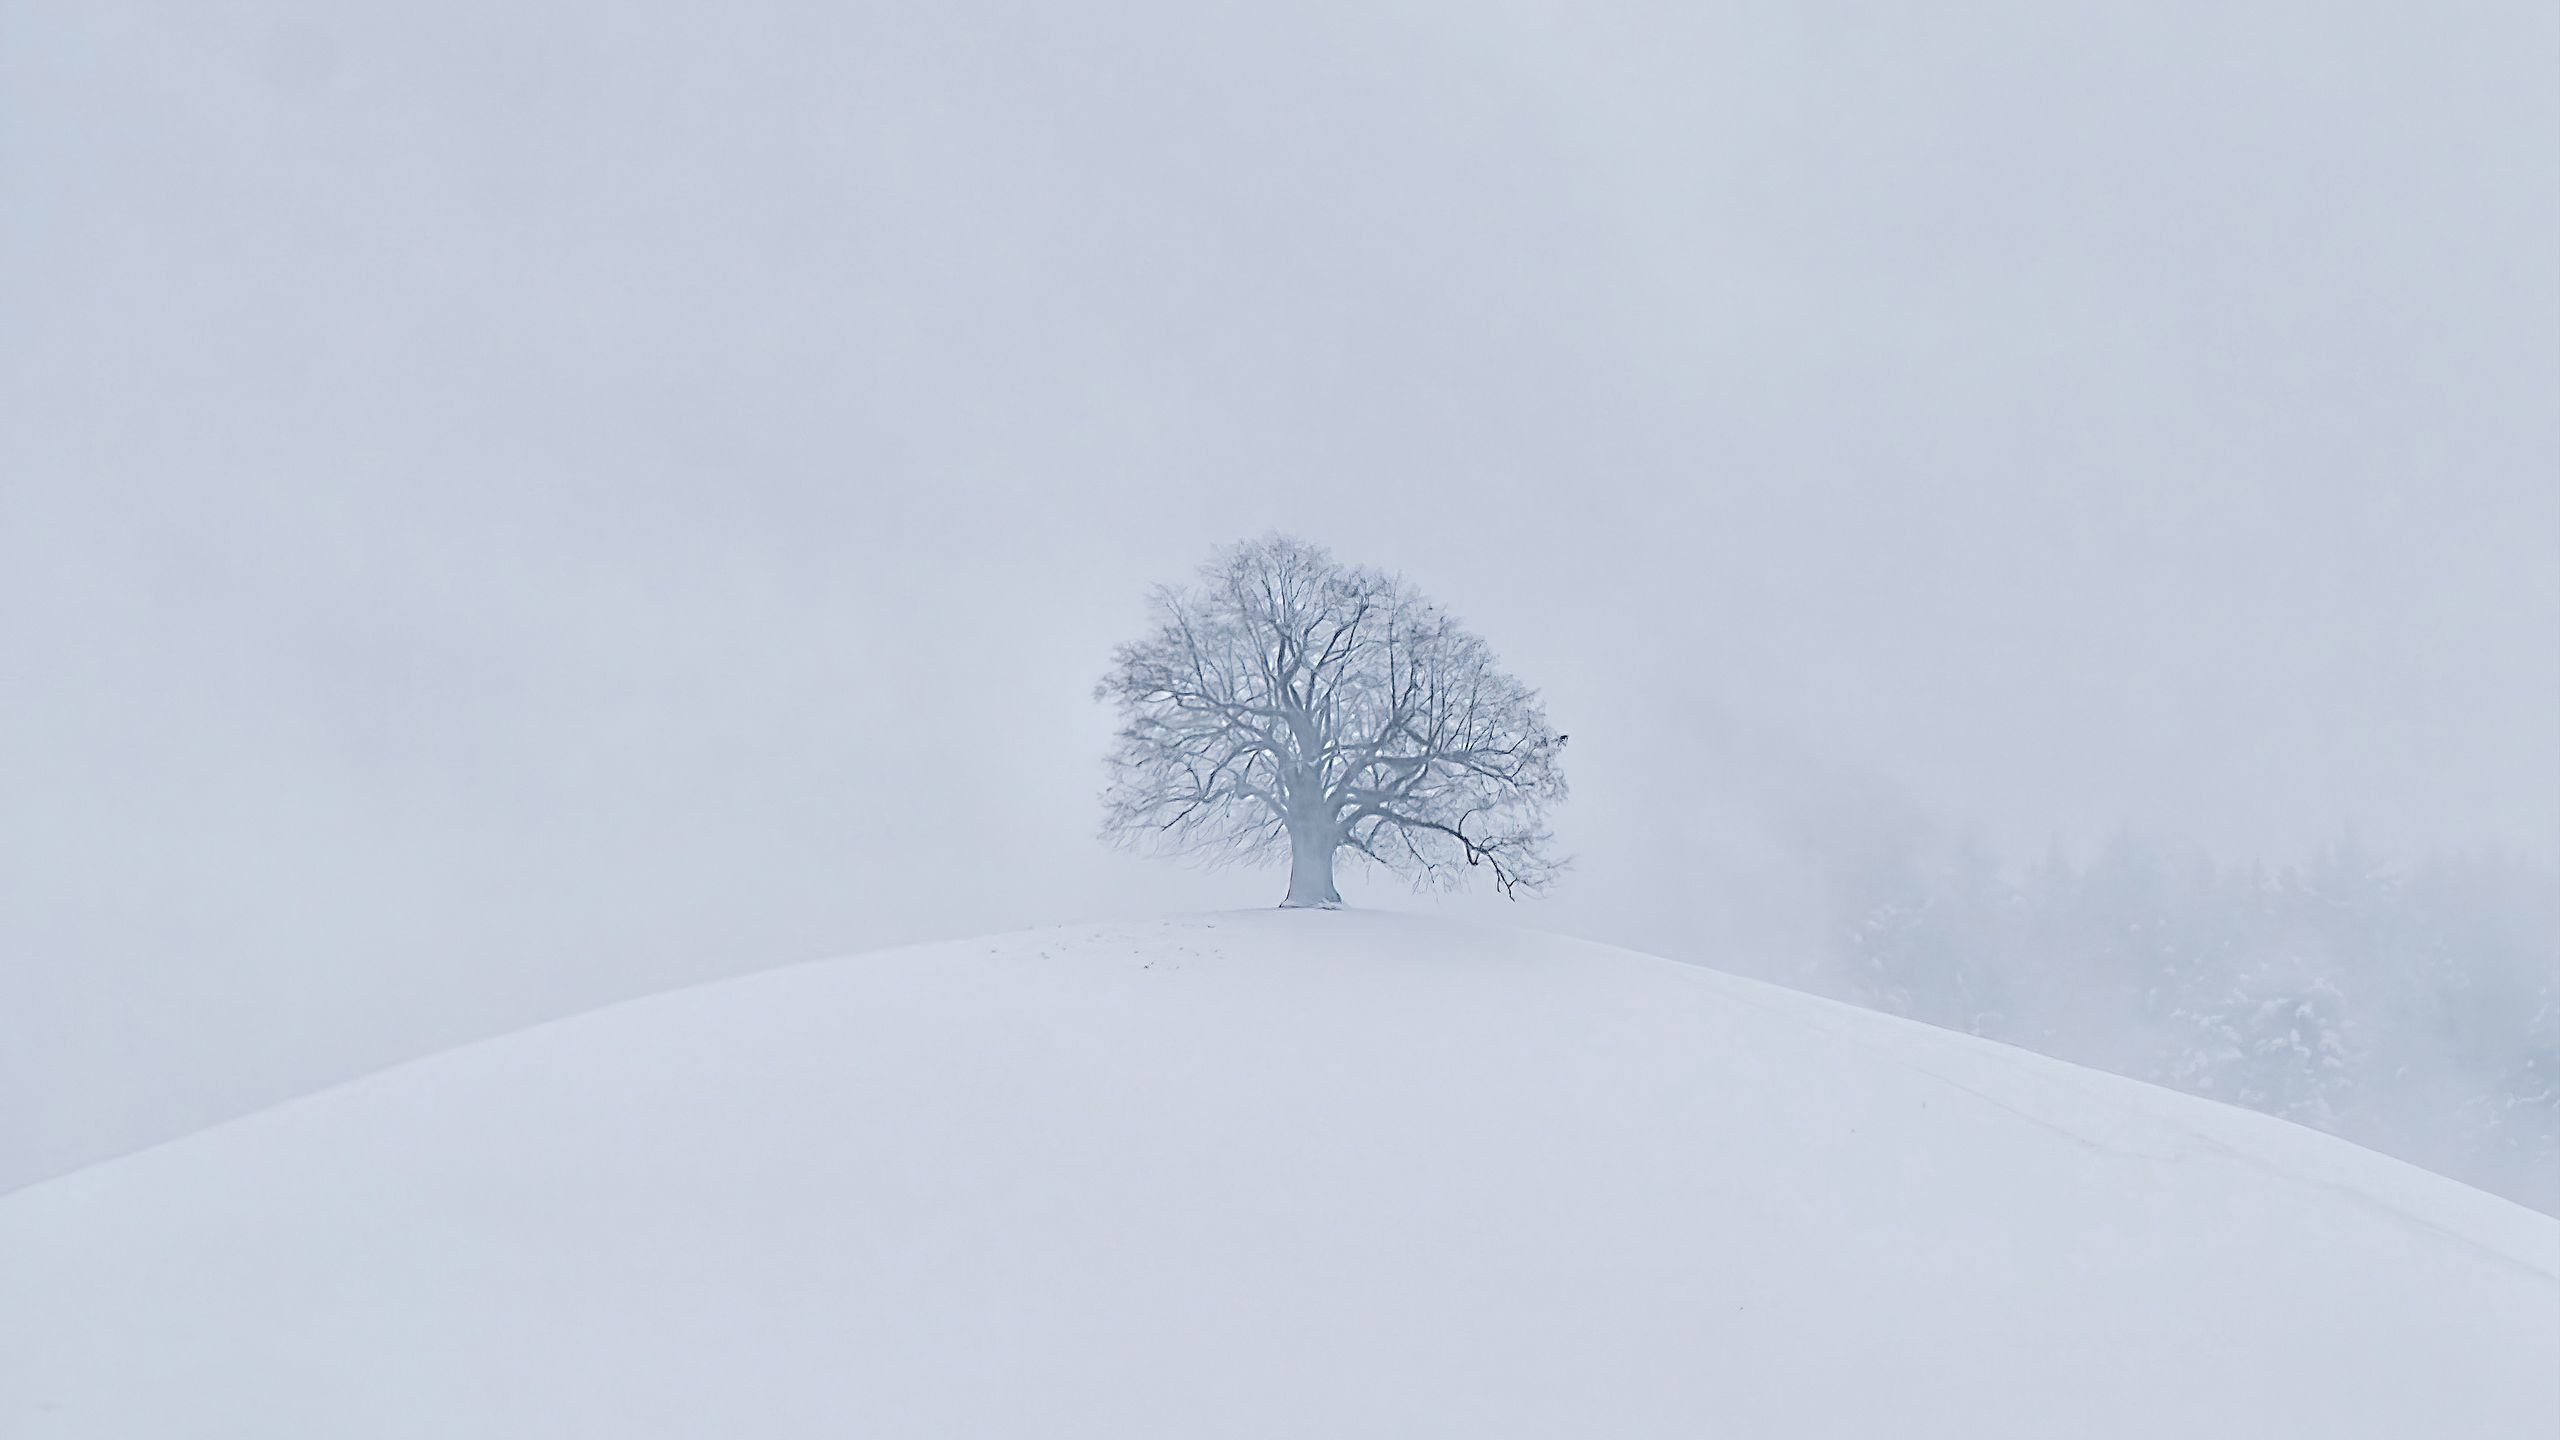 Download wallpaper 2560x1440 hill, tree, snow, winter, white widescreen 16:9 HD background